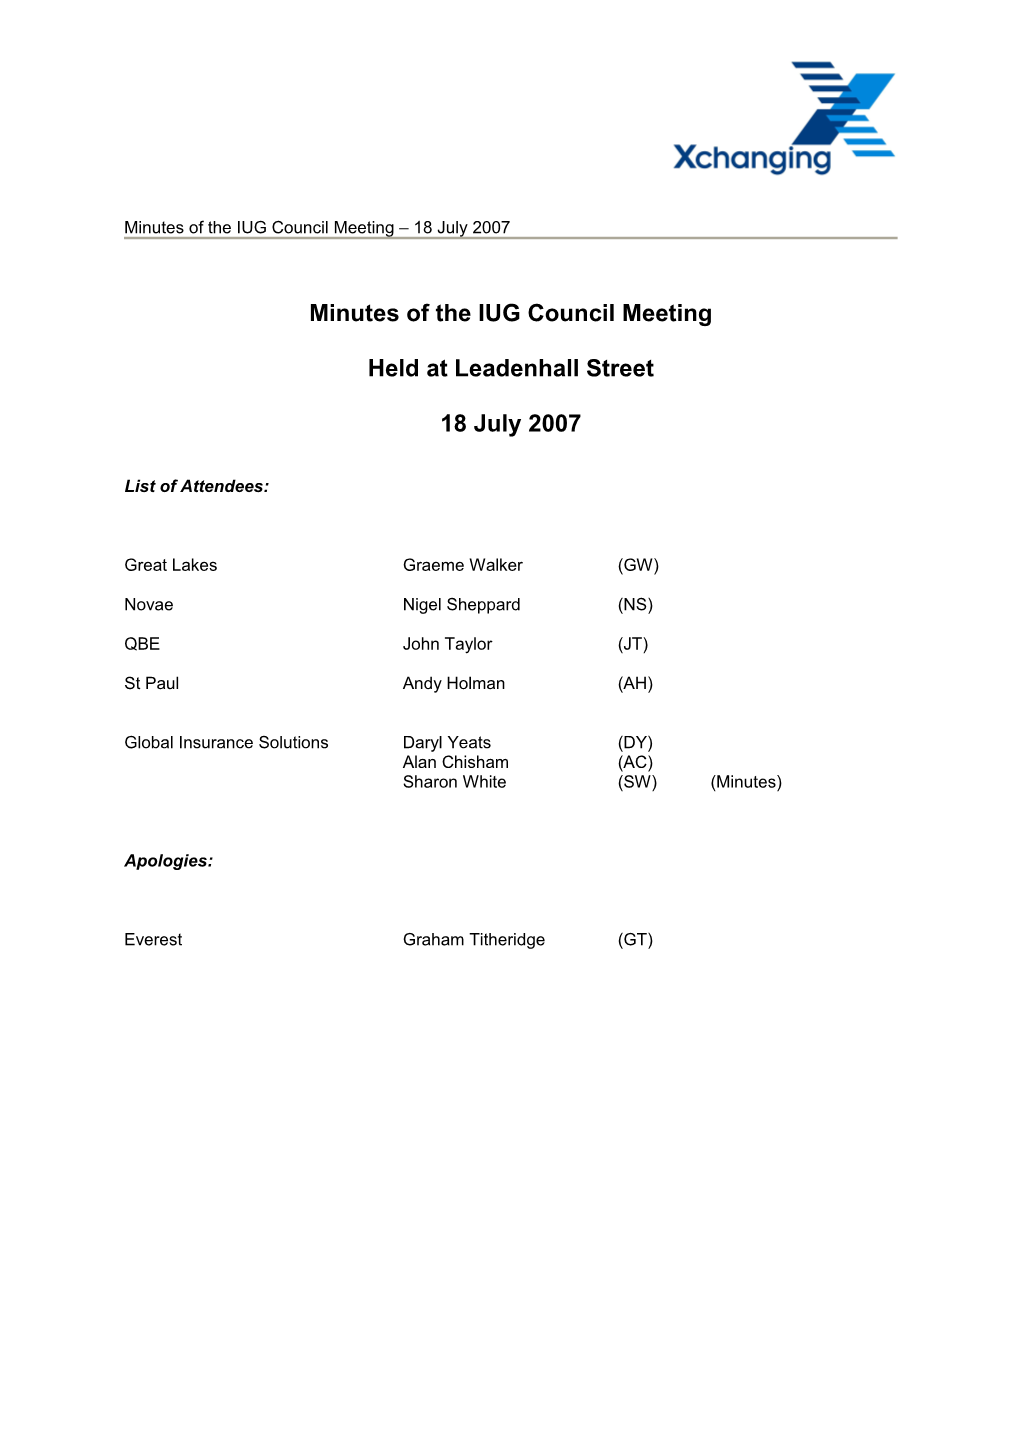 Minutes of the IUG Council Meeting